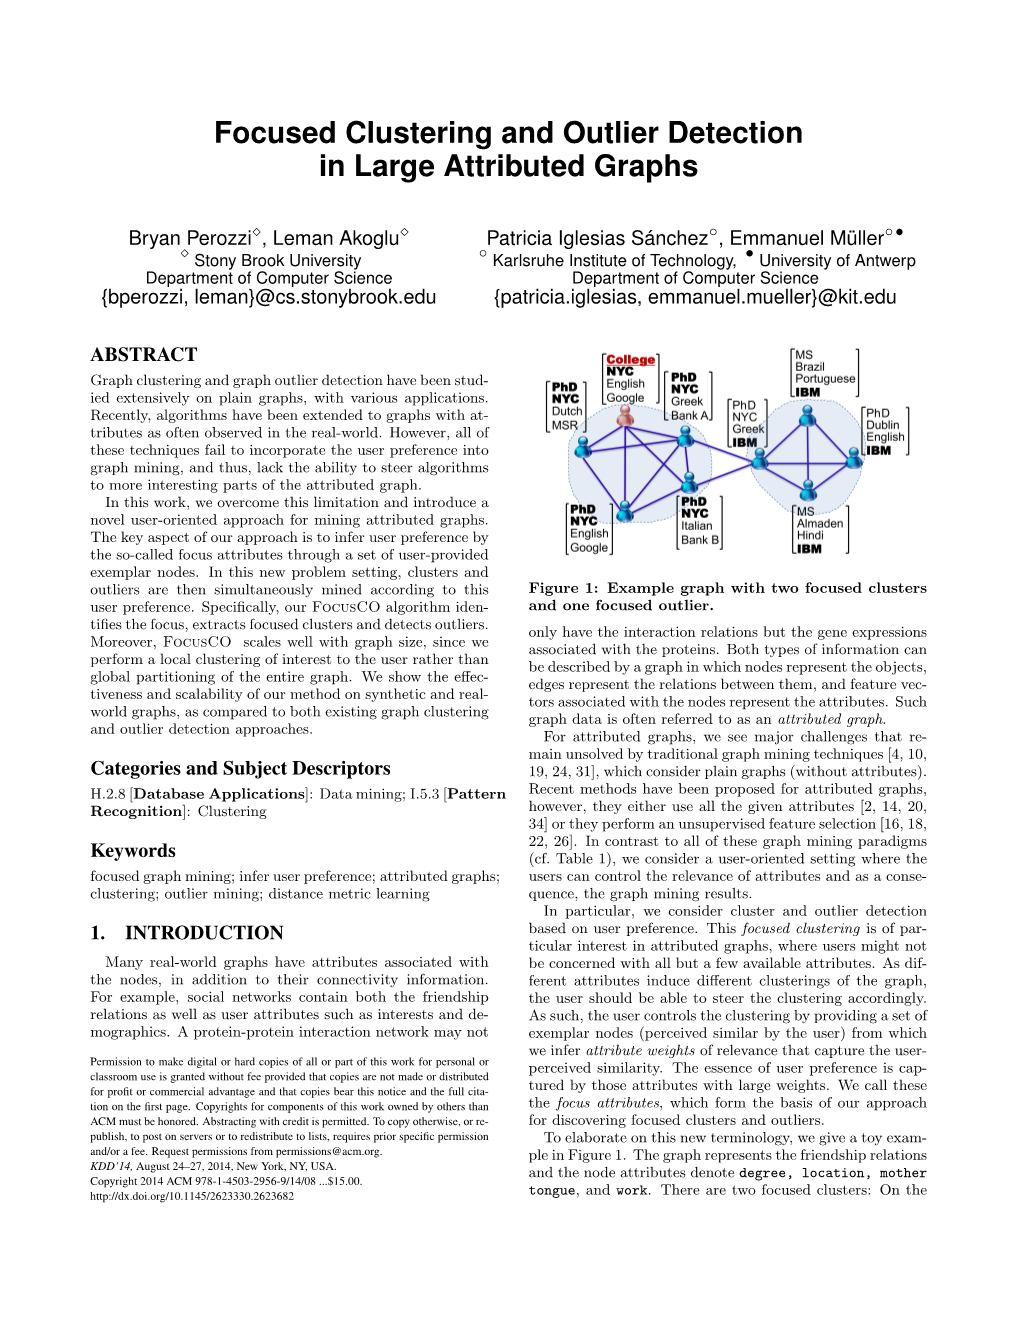 Focused Clustering and Outlier Detection in Large Attributed Graphs